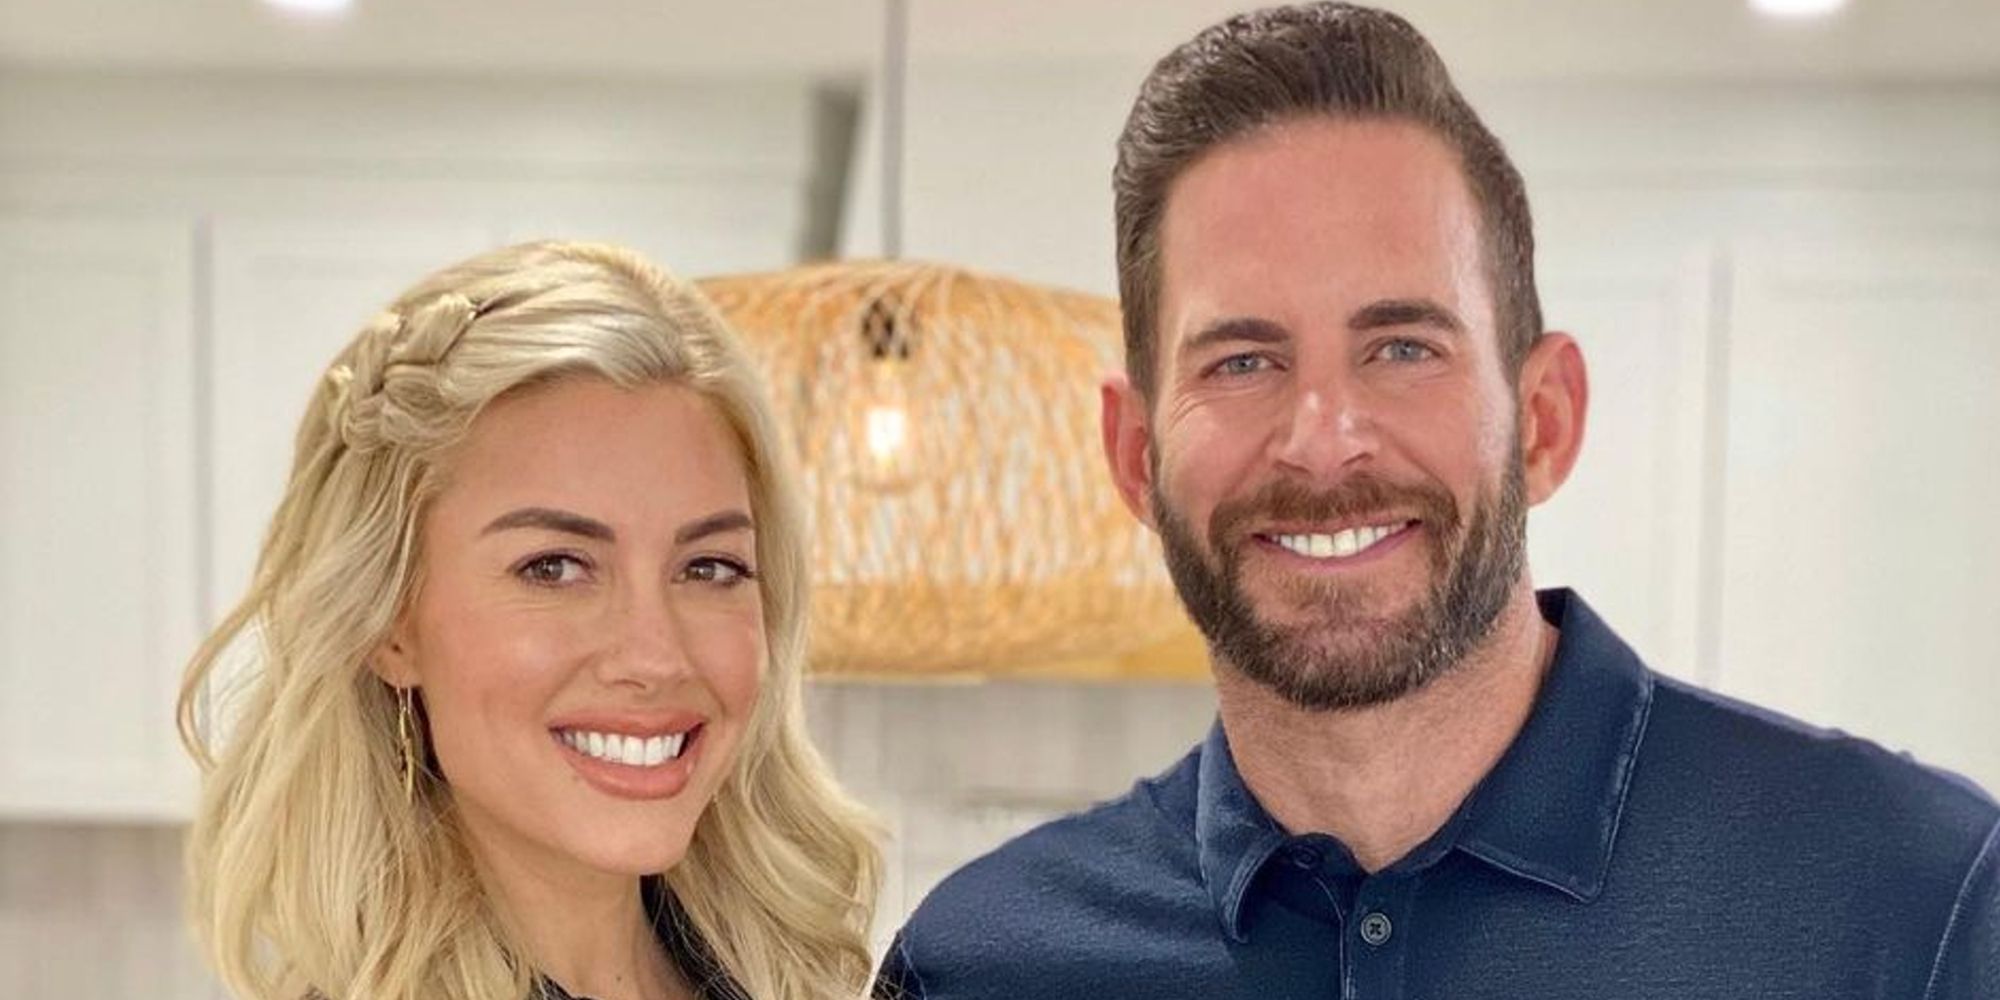 Heather Rae Young and Tarek El Moussa from Selling Sunset season 4